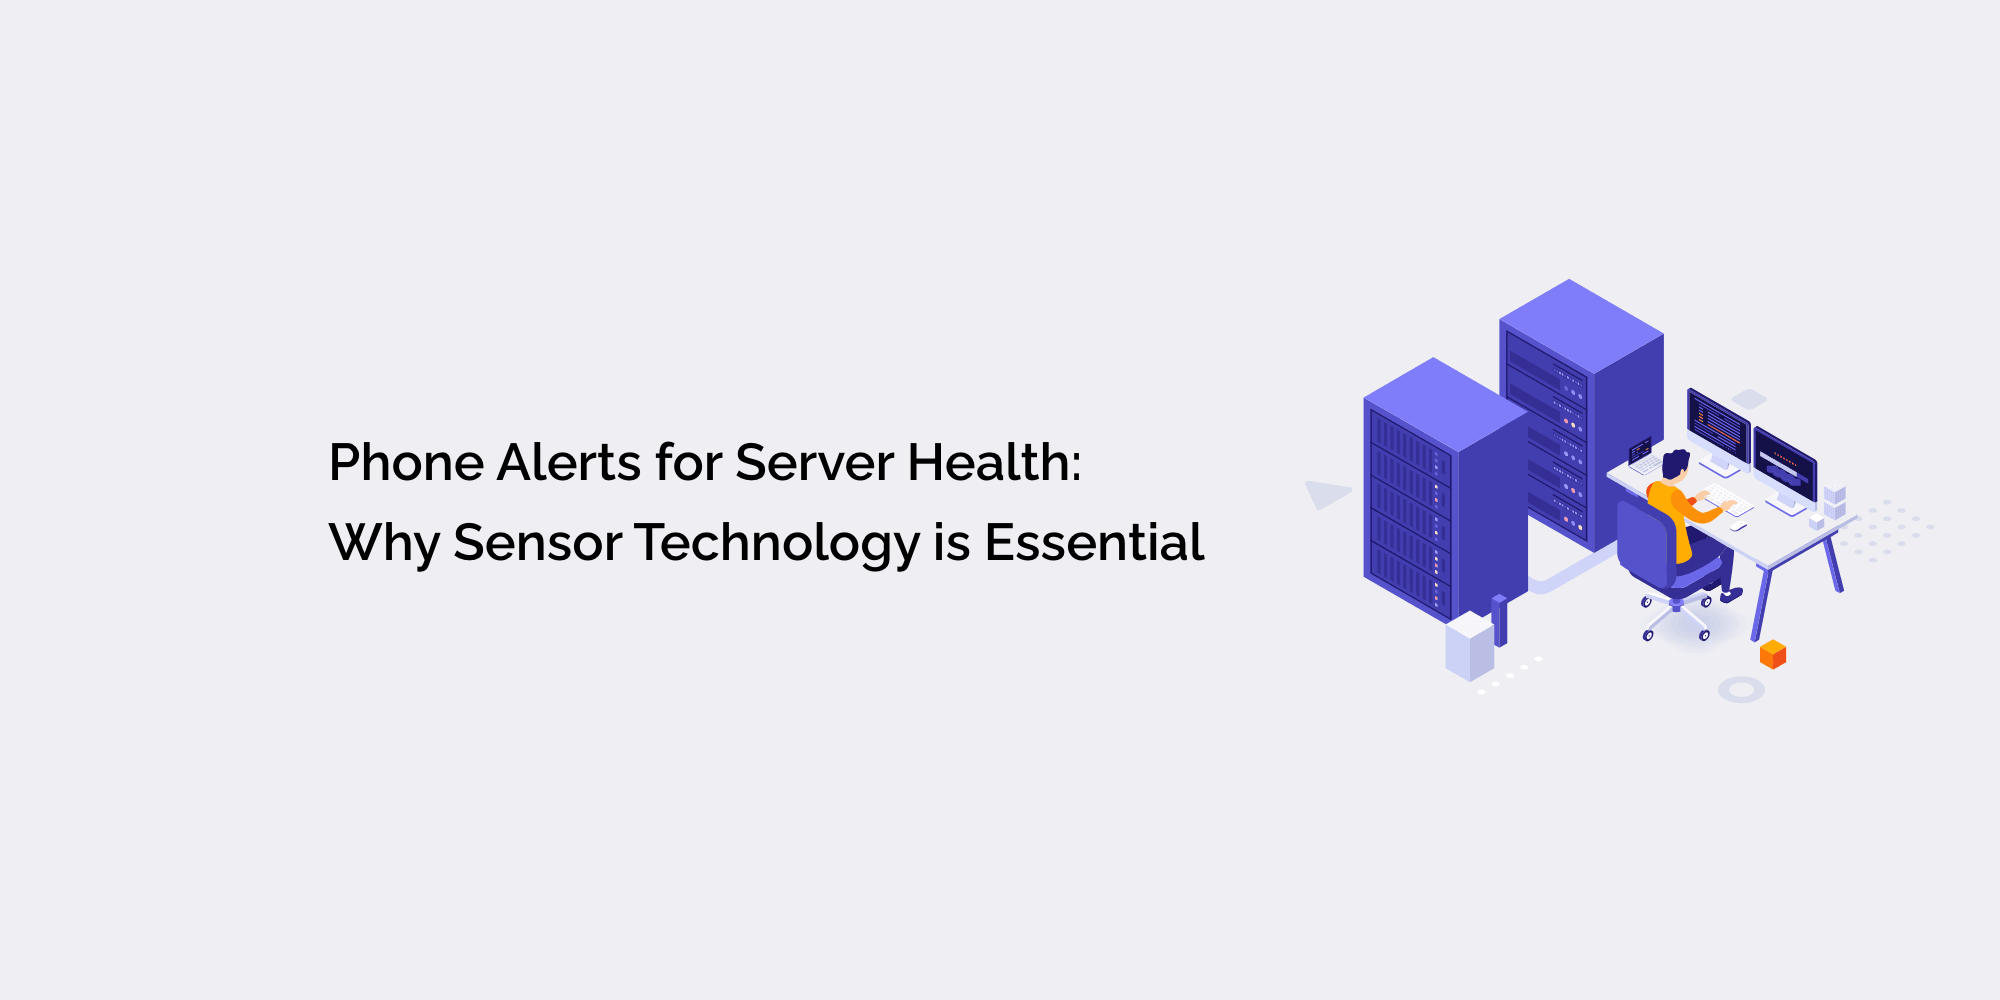 Phone Alerts for Server Health: Why Sensor Technology is Essential